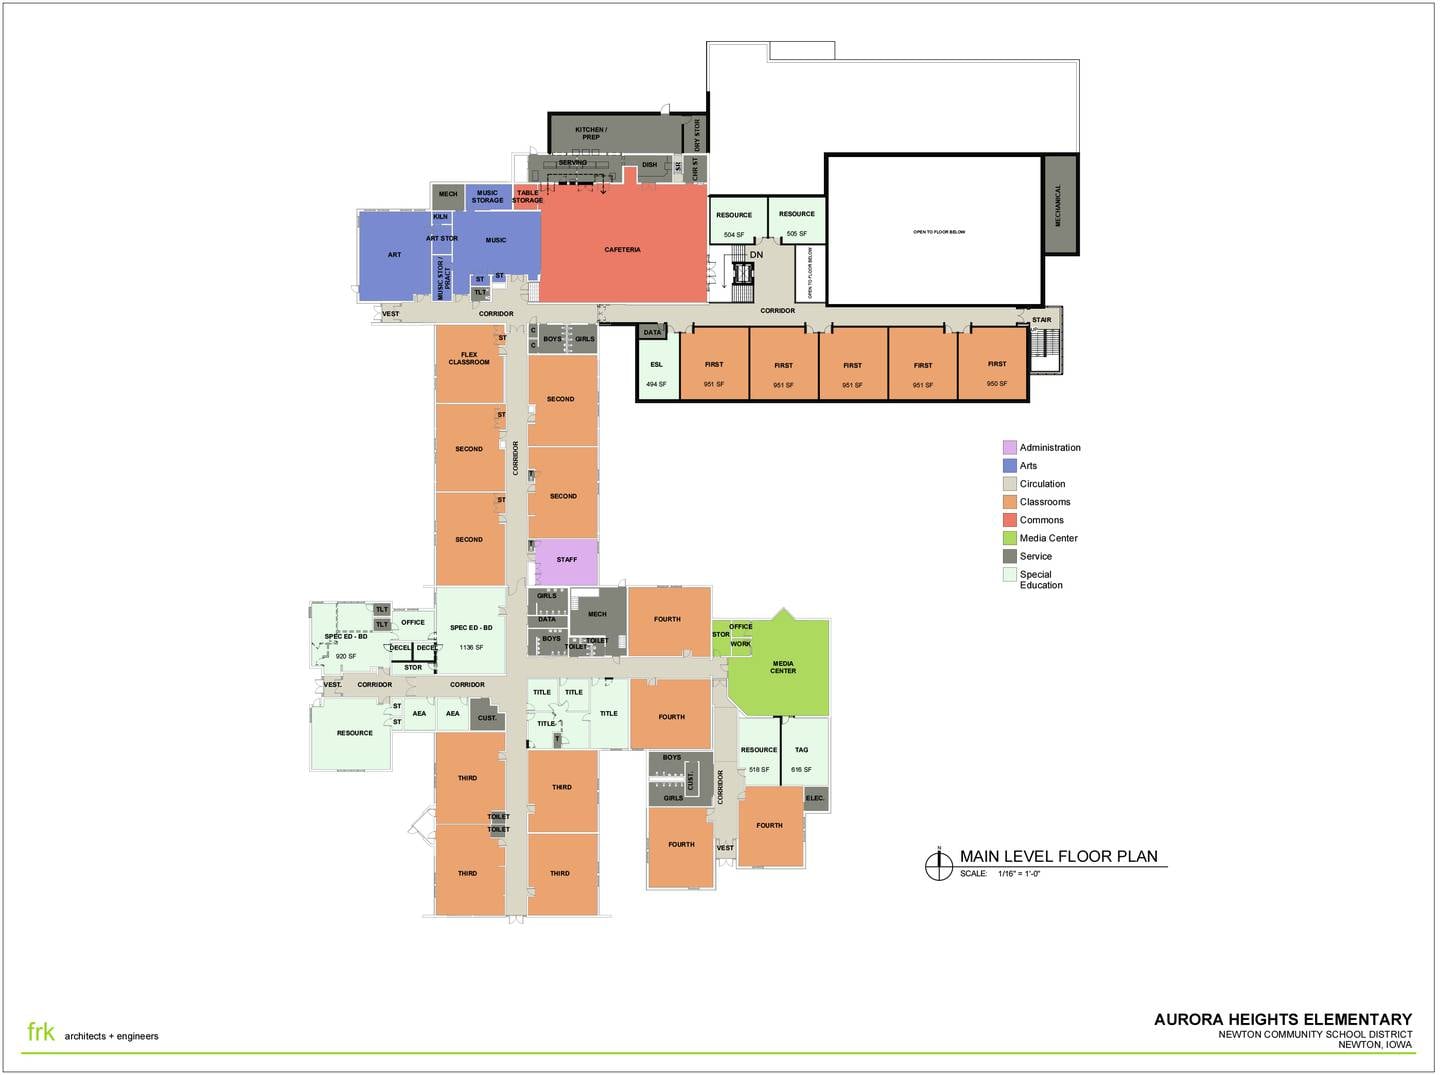 Site plans of the main level for the new Aurora Heights Elementary School show five classrooms are reserved for first grade, four classrooms reserved for second grade, four classrooms reserved for third grade and four classrooms reserved for fourth grade.